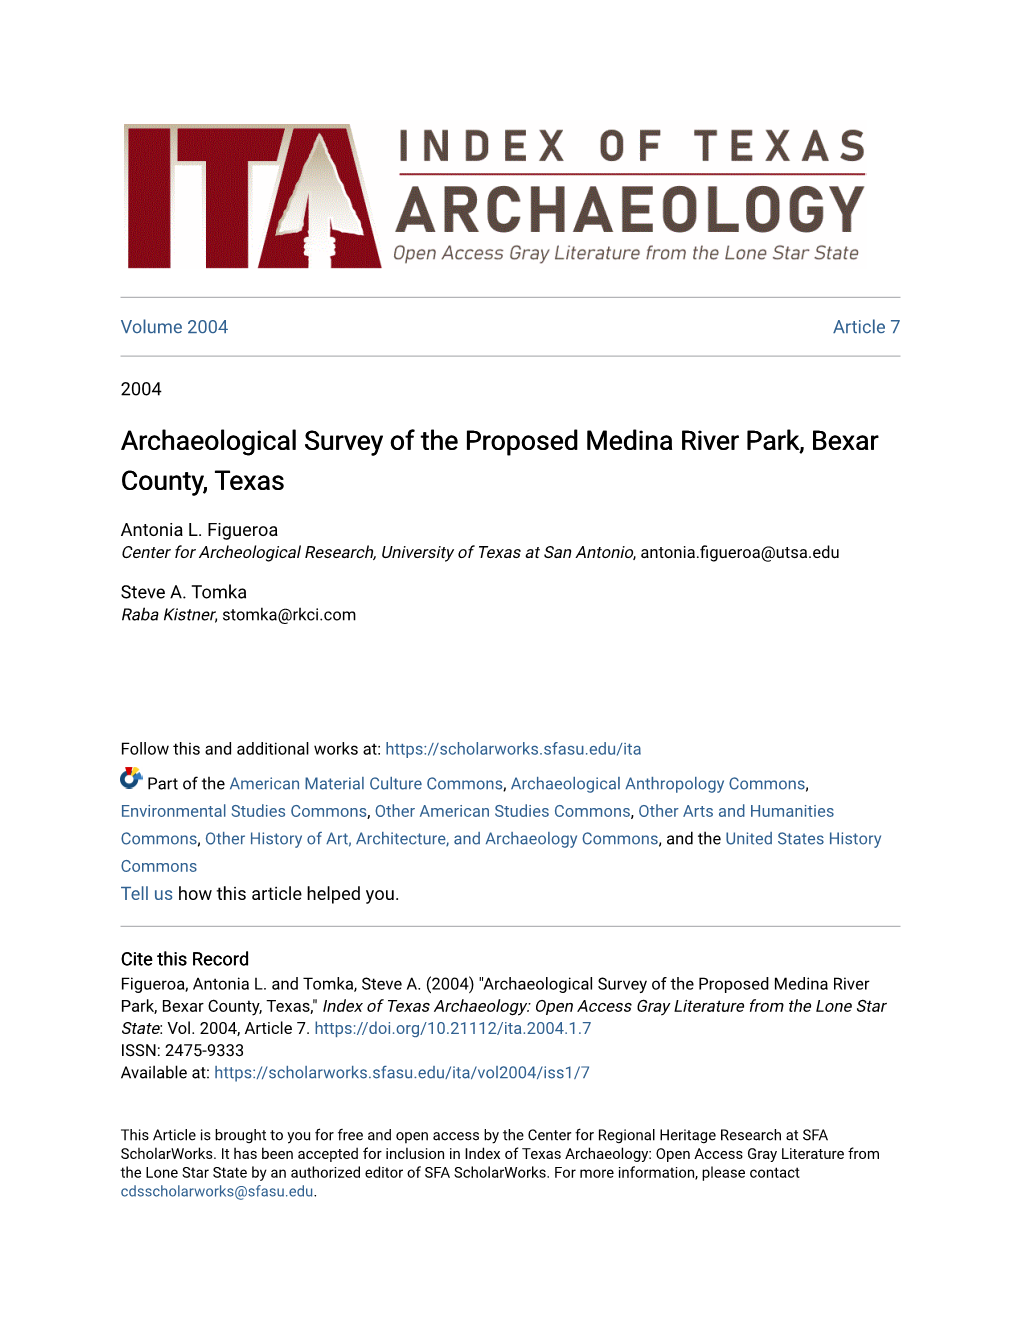 Archaeological Survey of the Proposed Medina River Park, Bexar County, Texas